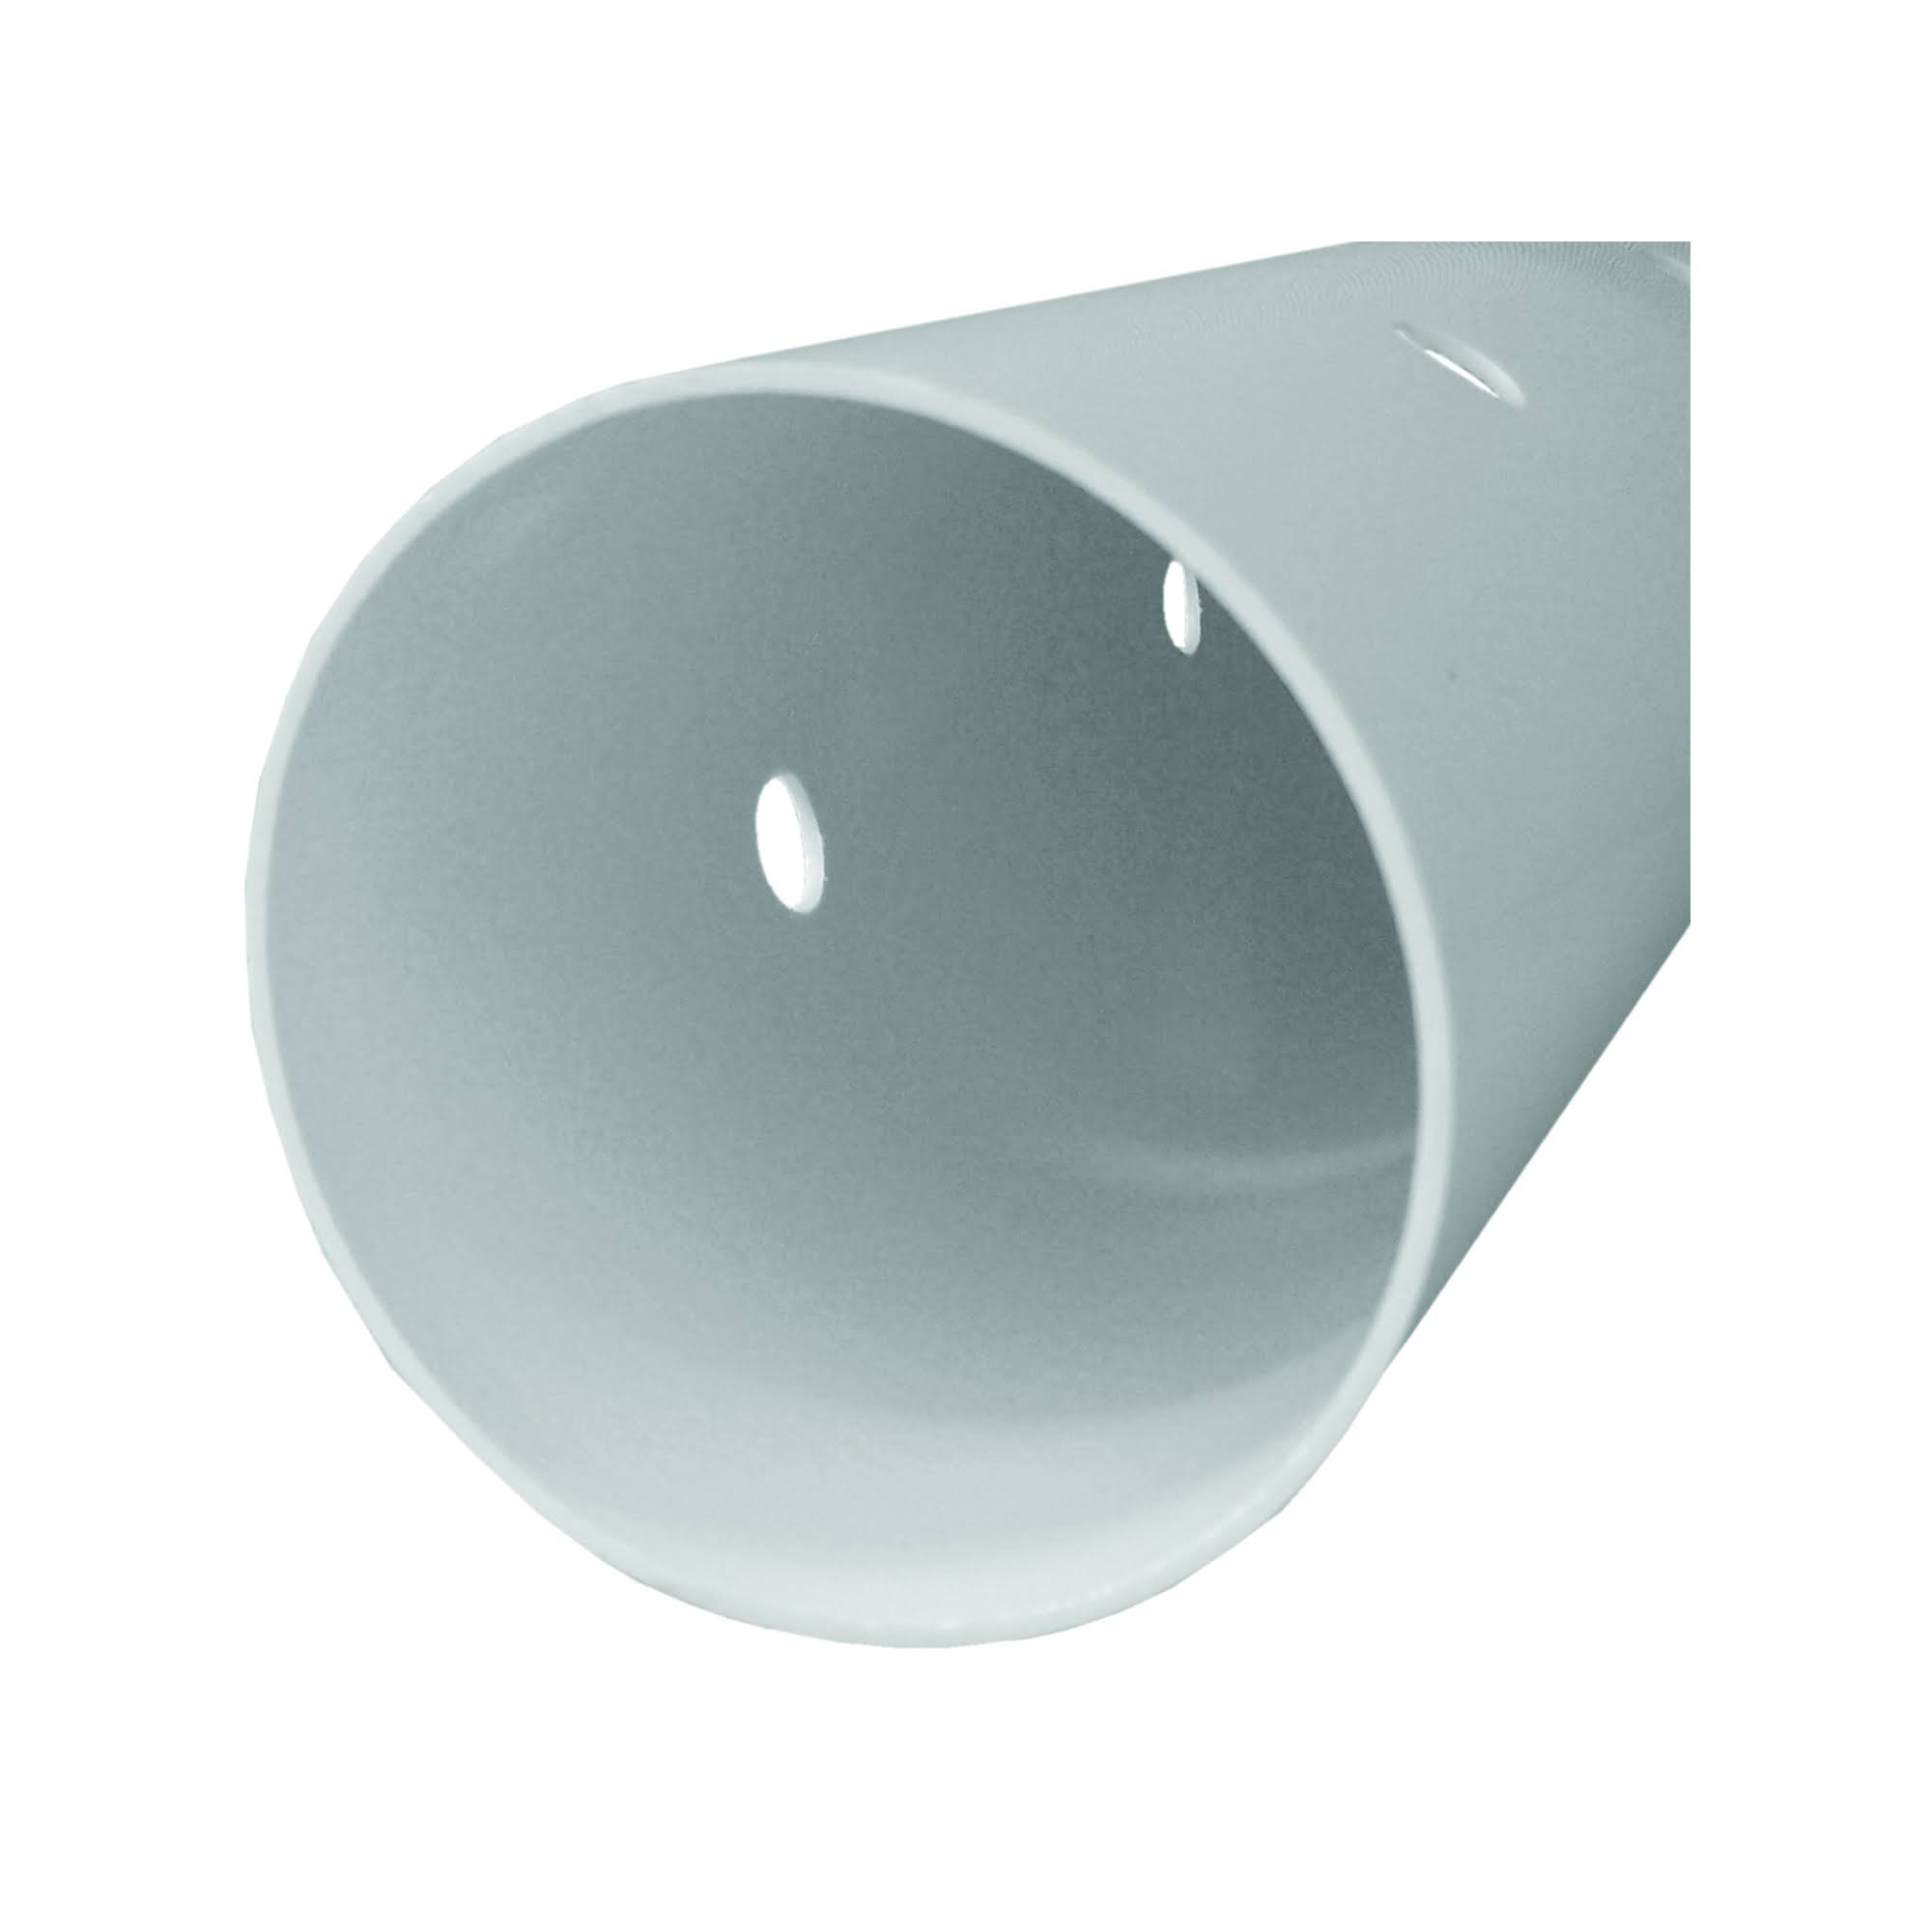 Genova Perforated Pvc Sewer and Drain Pipe - 4" x 10'